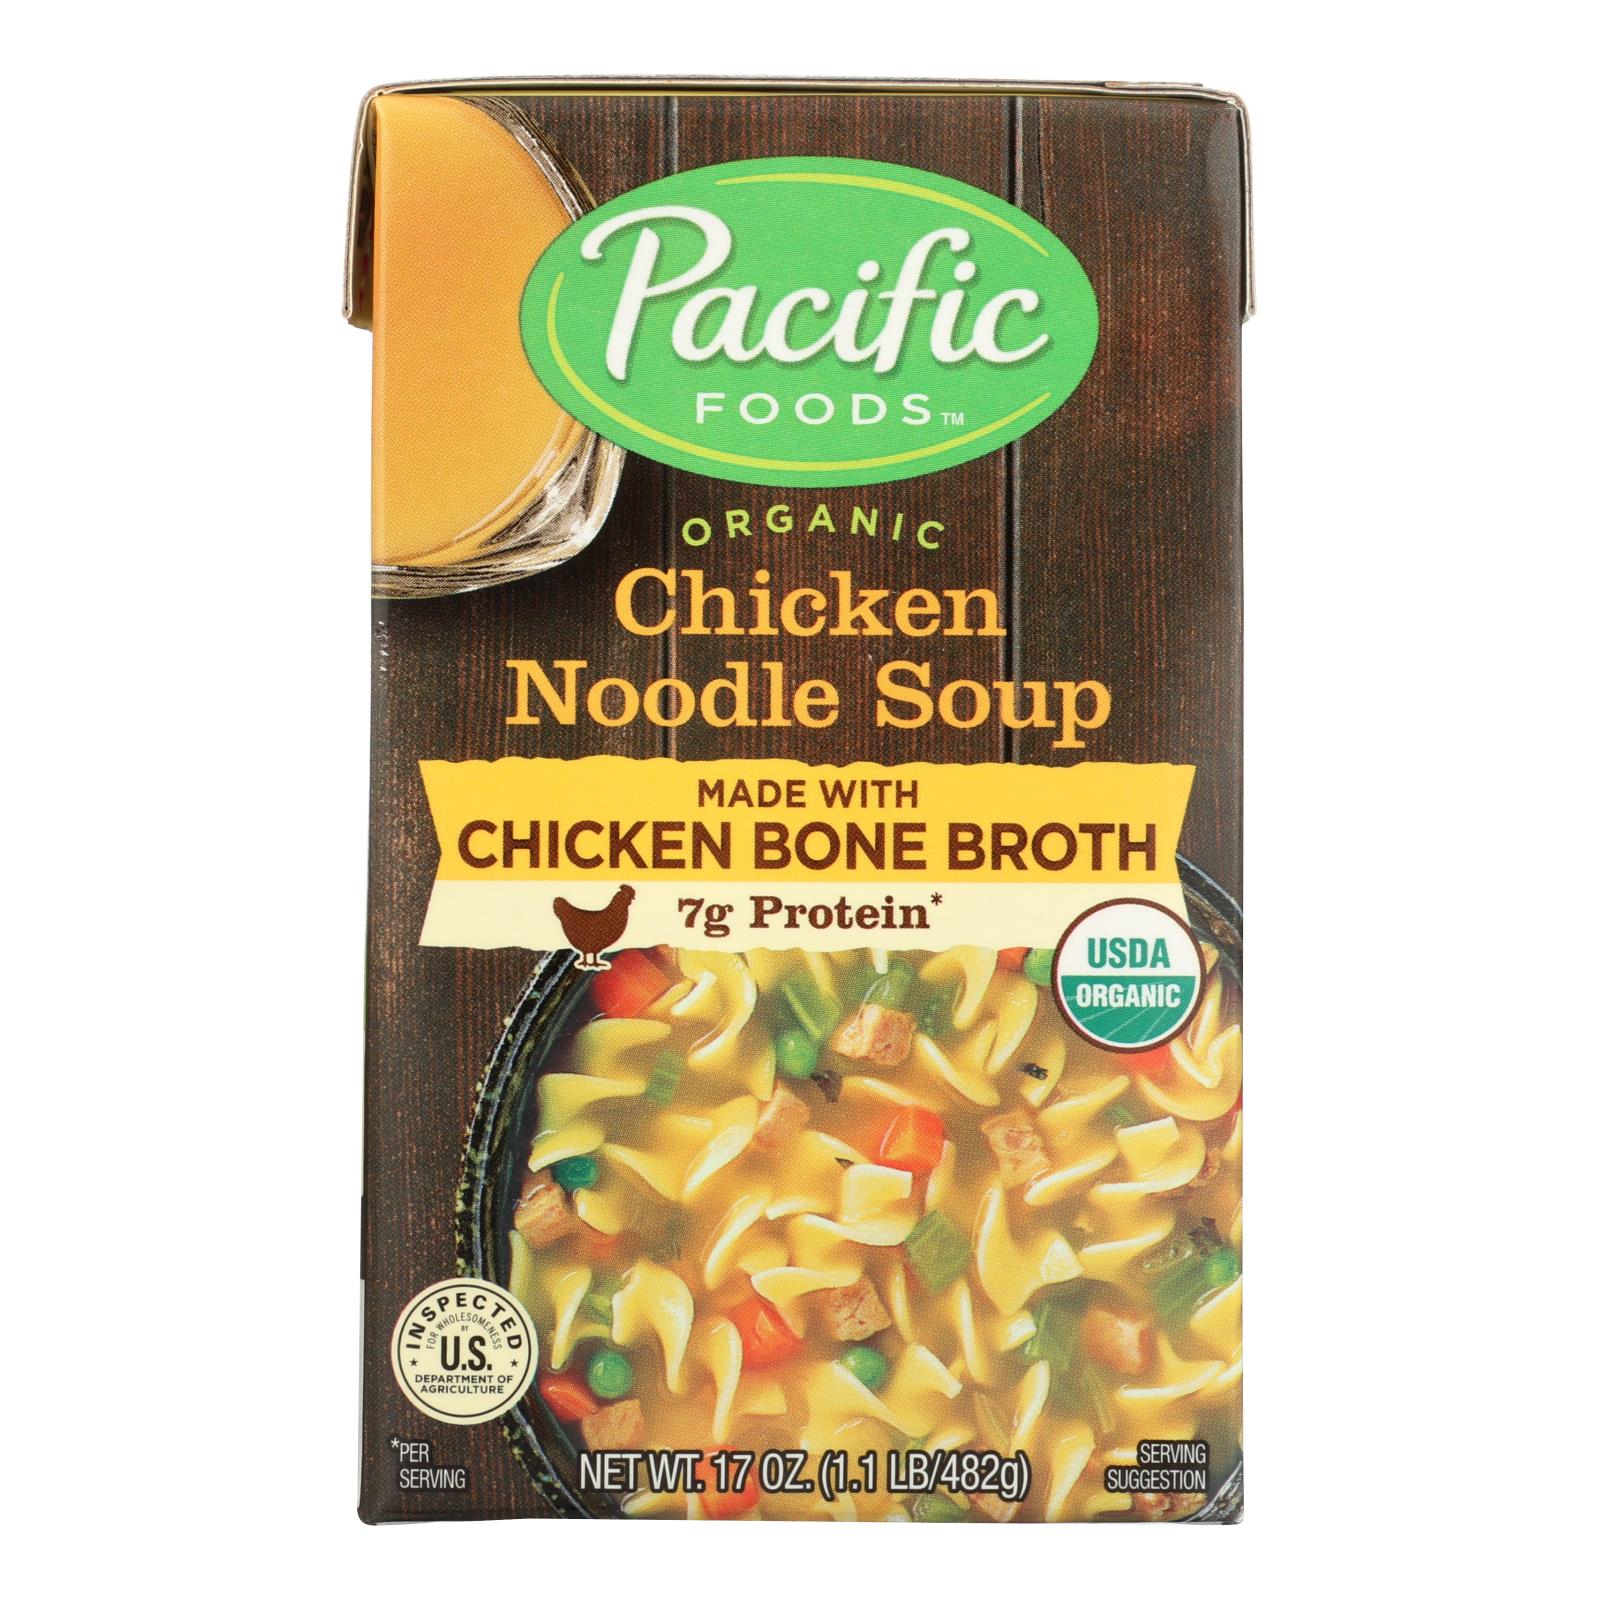 Pacific Natural Foods Chicken Noodle Soup - 12개 묶음상품 - 17 OZ